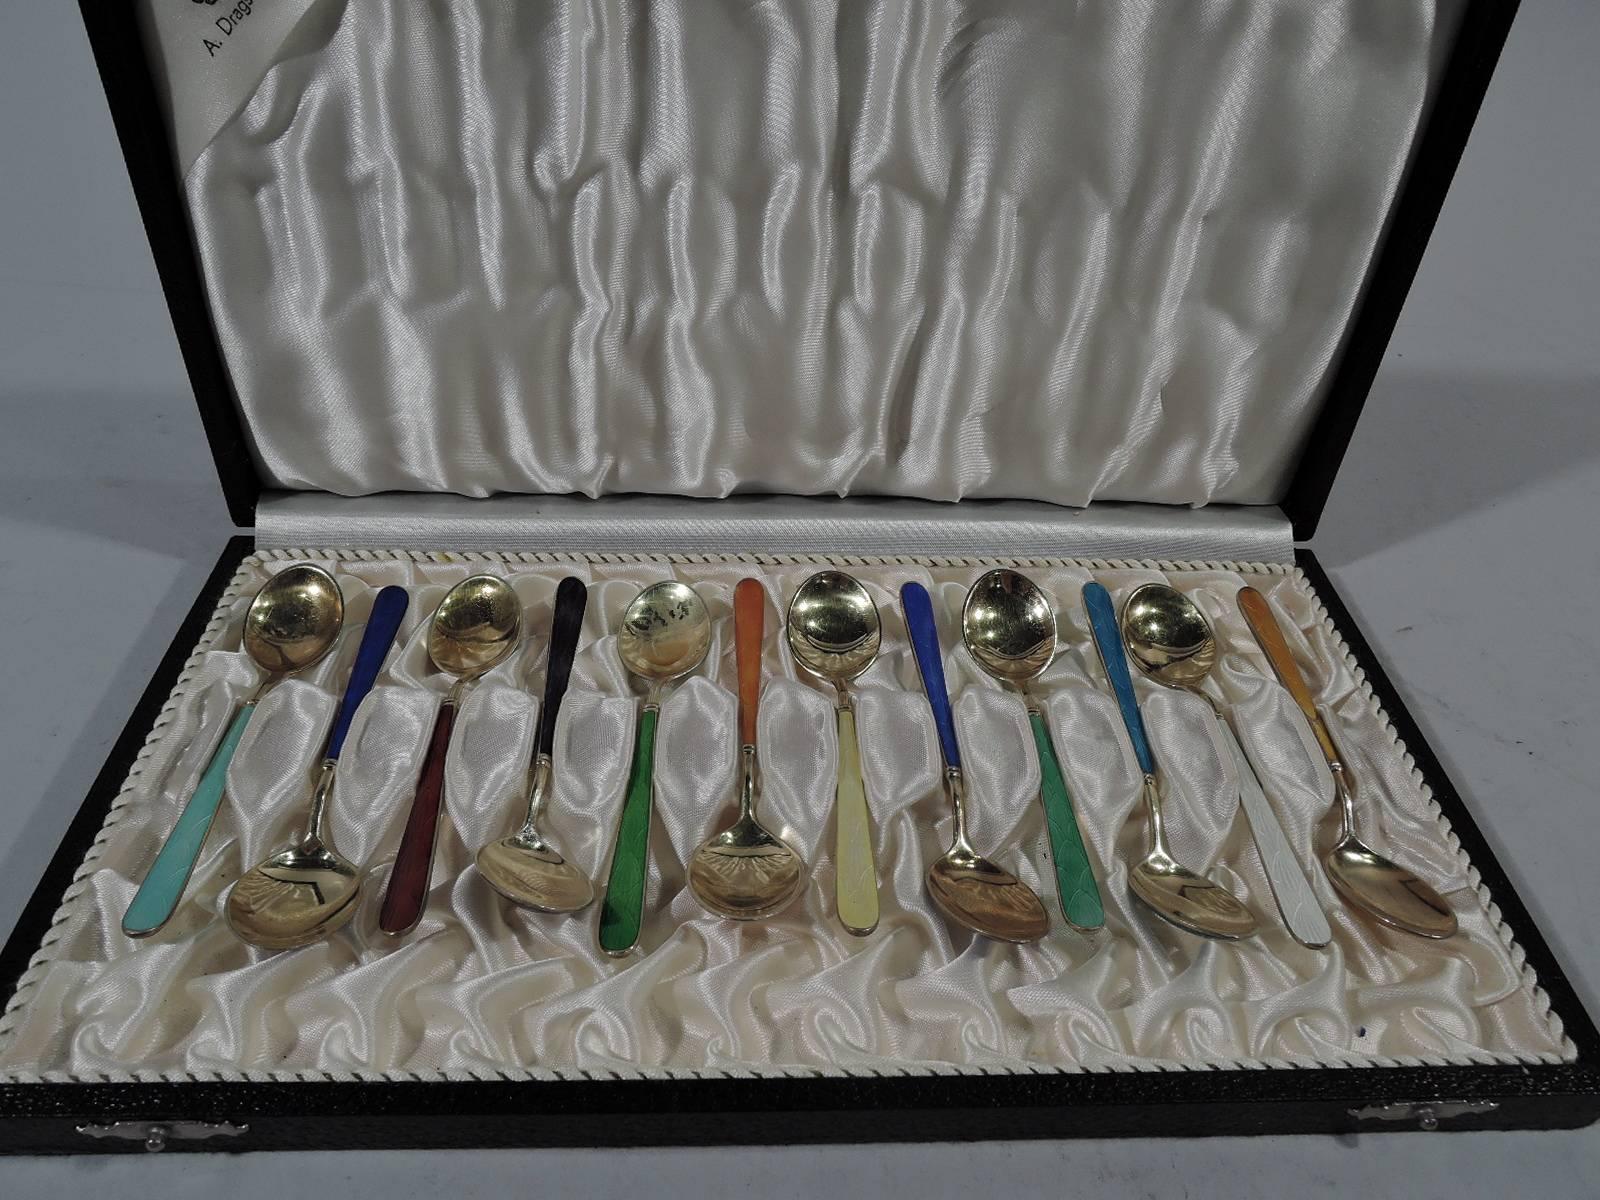 Set of 12 Danish Modern gilt sterling silver and enamel demitasse spoons. Made by A. Dragsted in Copenhagen. Each spoon has tapering handle with double-sided enamel and oval bowl with gilt interior and enameled underside. Enamel has imbricated fan